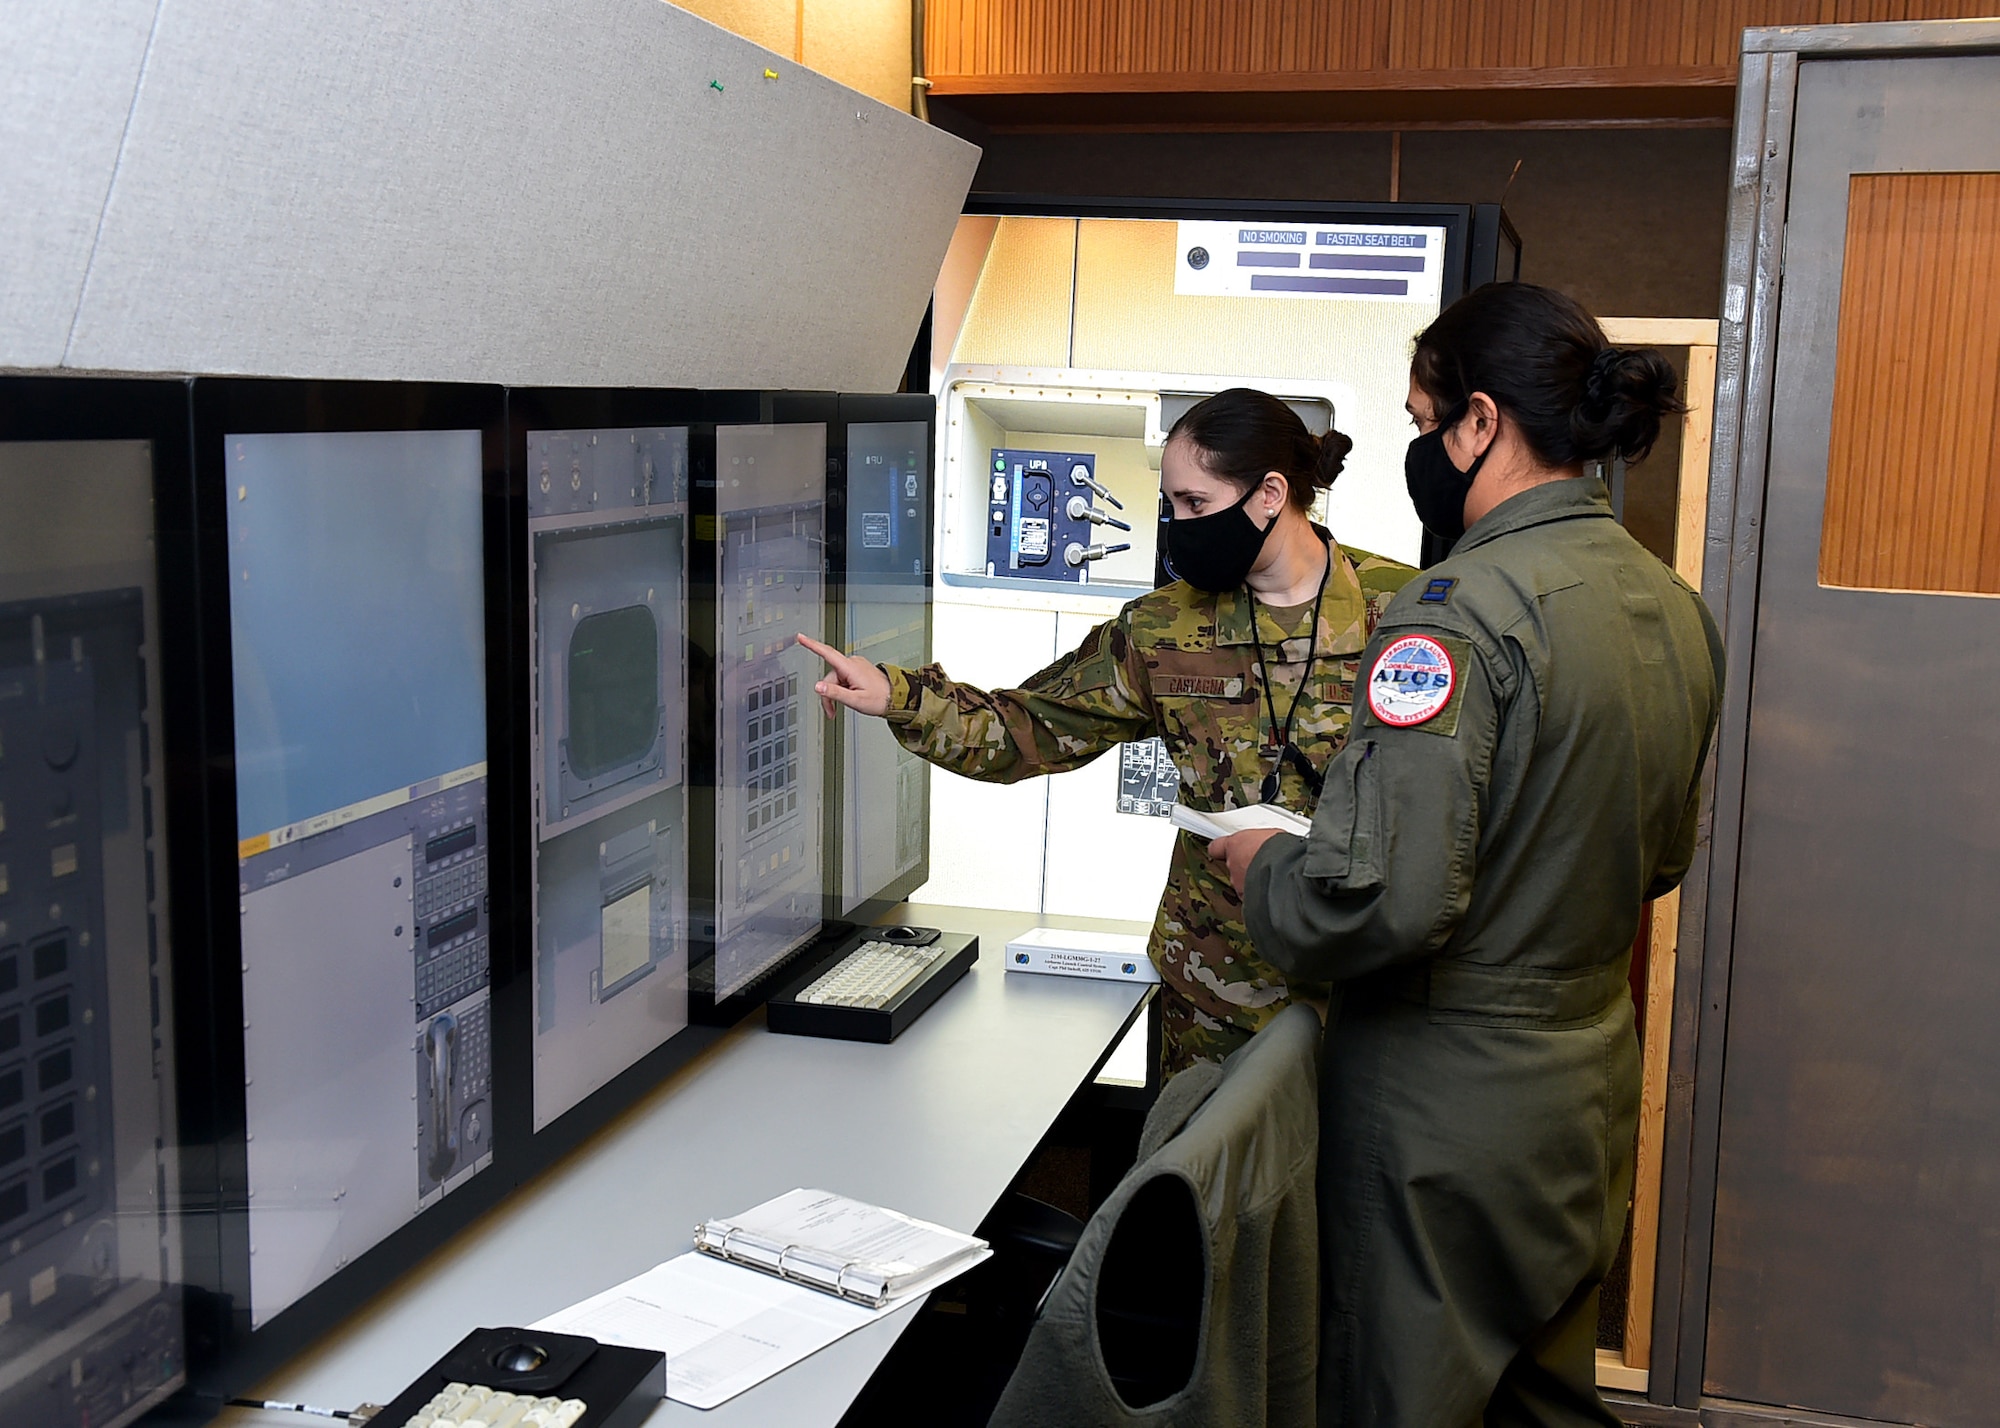 From left, Capt. Grazia Castagna, 625th Strategic Operations Squadron intelligence officer, and Capt. Stephanie Konvalin, 625th STOS strike planner, conduct operations in a newly-established trainer March 5, 2021, at Offutt Air Force Base, Neb.